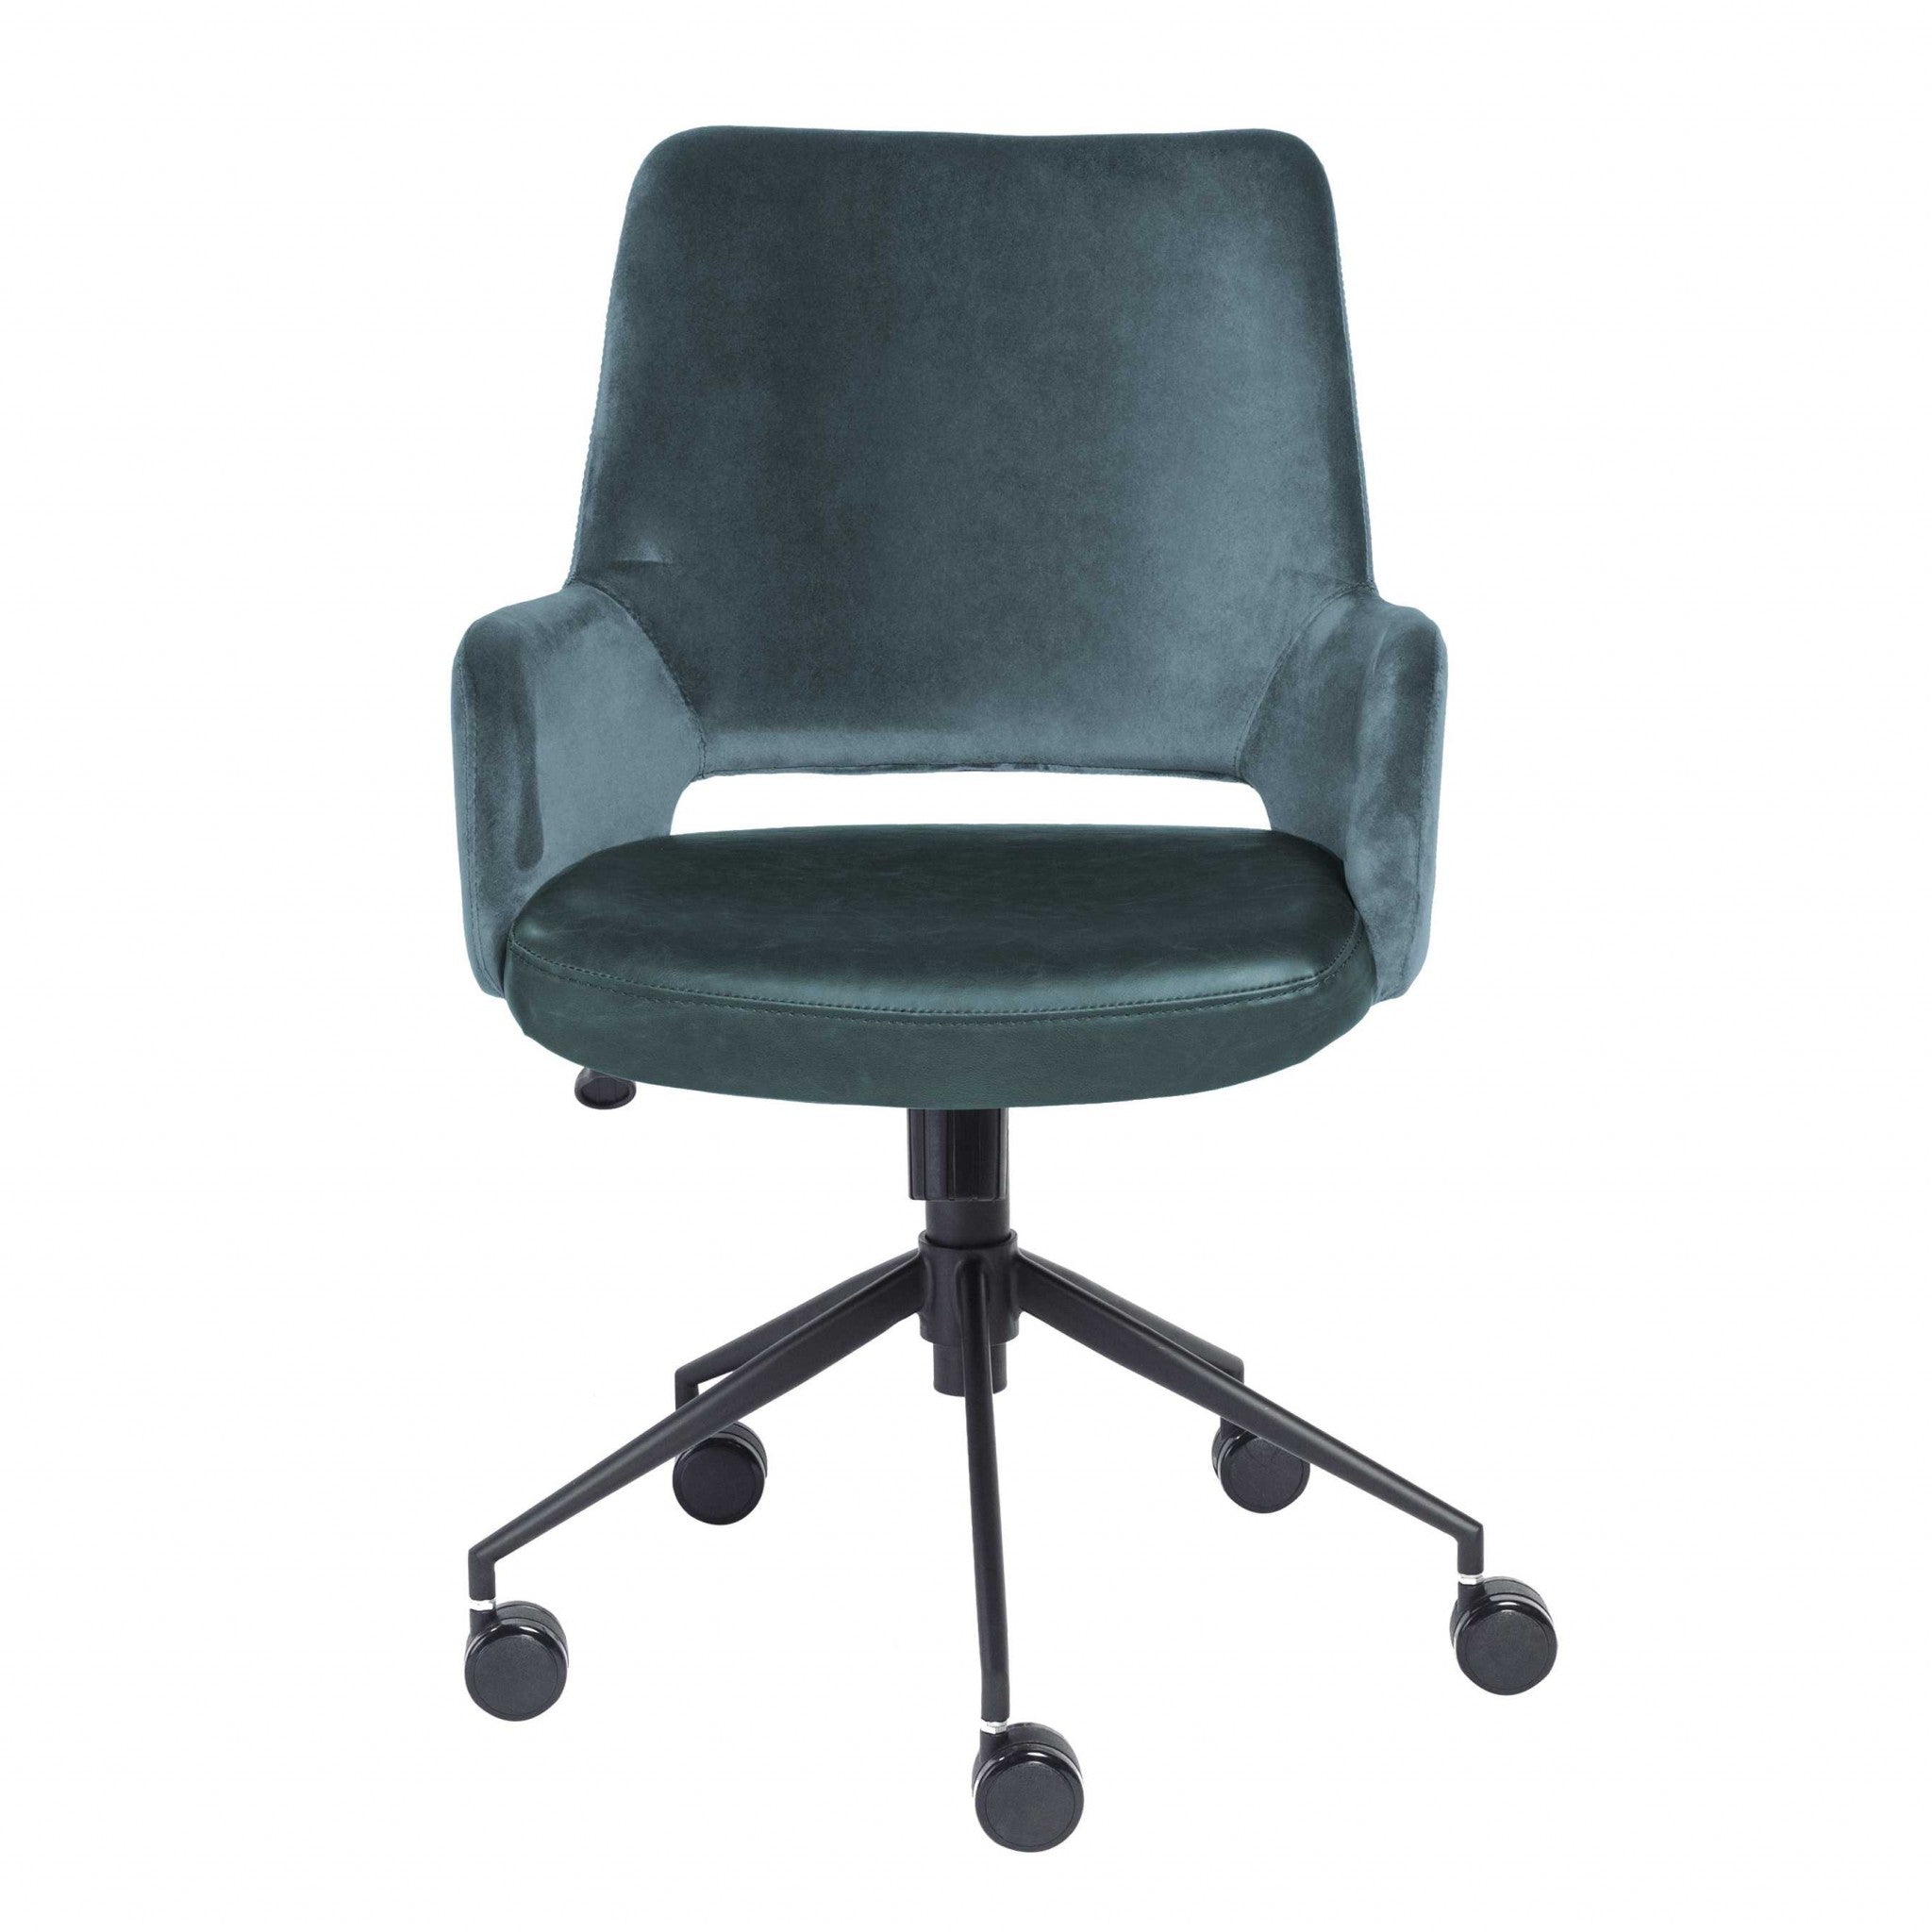 Blue-and-Black-Adjustable-Swivel-Fabric-Rolling-Task-Chair-Office-Chairs